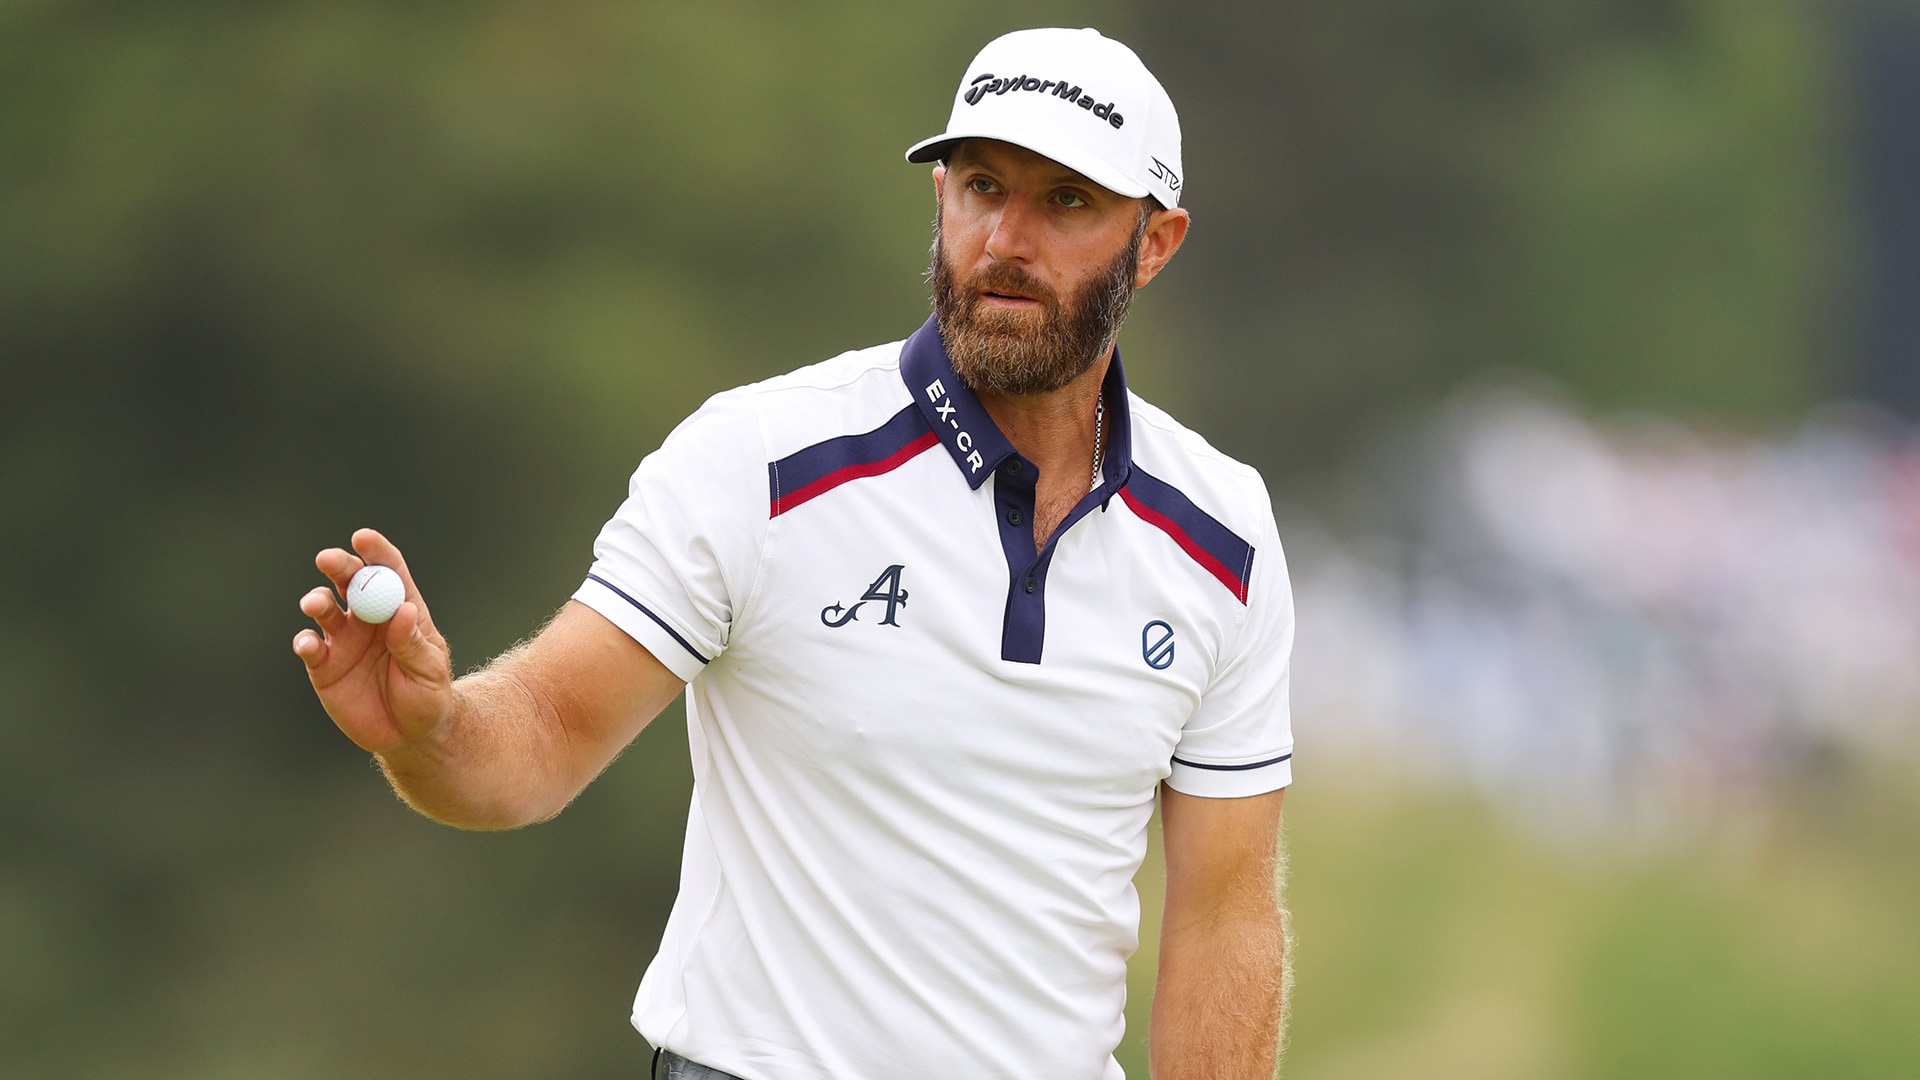 Dustin Johnson fights back after quad, still in contention at LACC